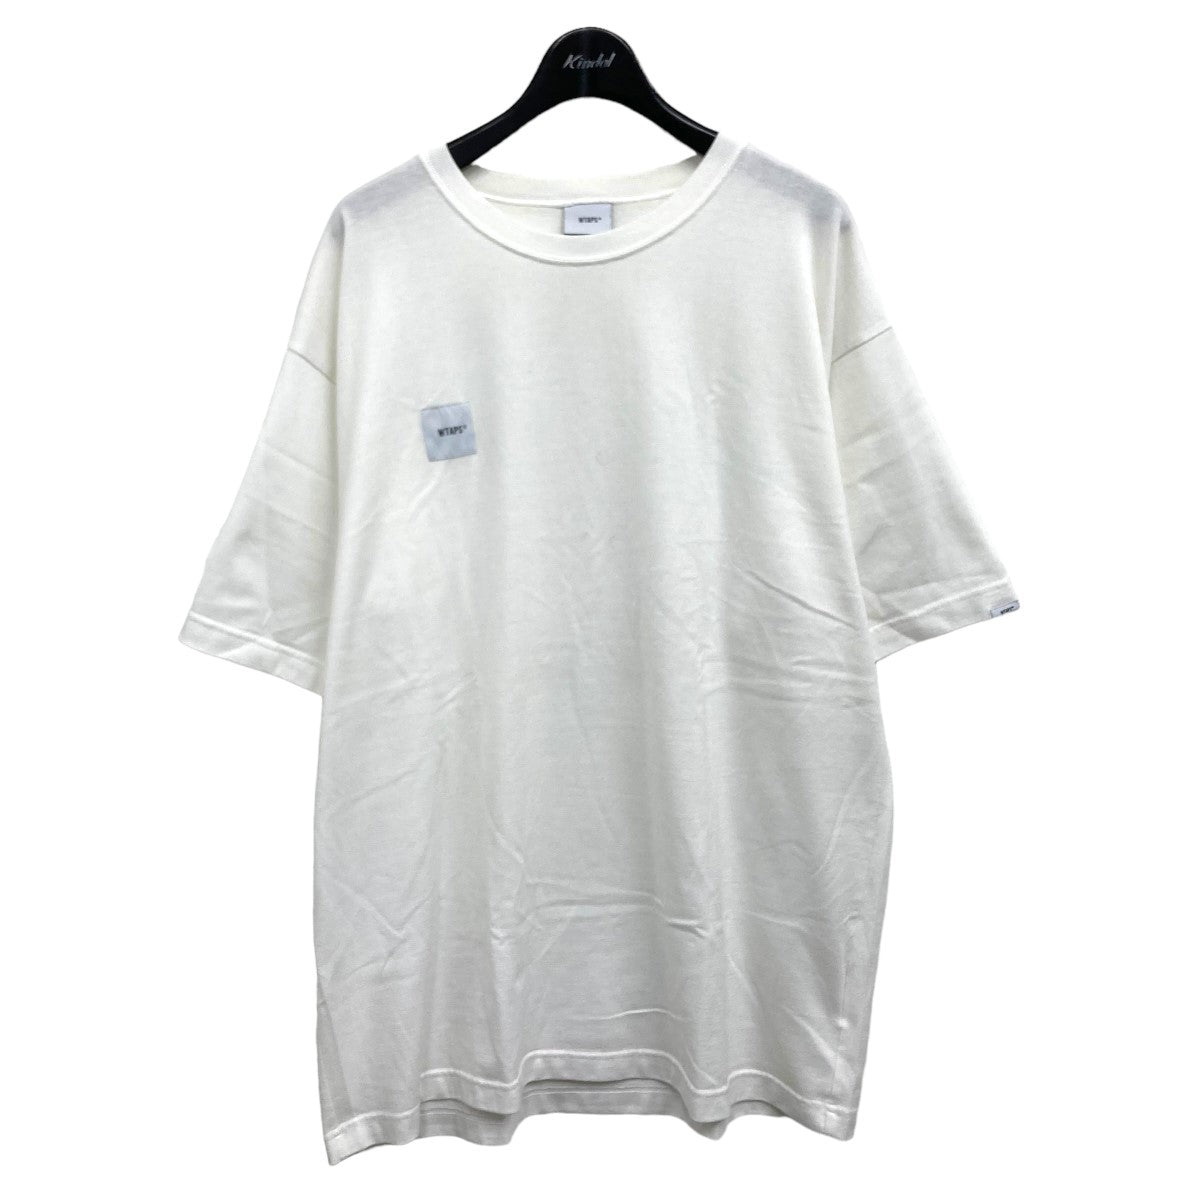 WTAPS(ダブルタップス) 「HOME BASE SS 01」Tシャツ 201ATDT-CSM01 